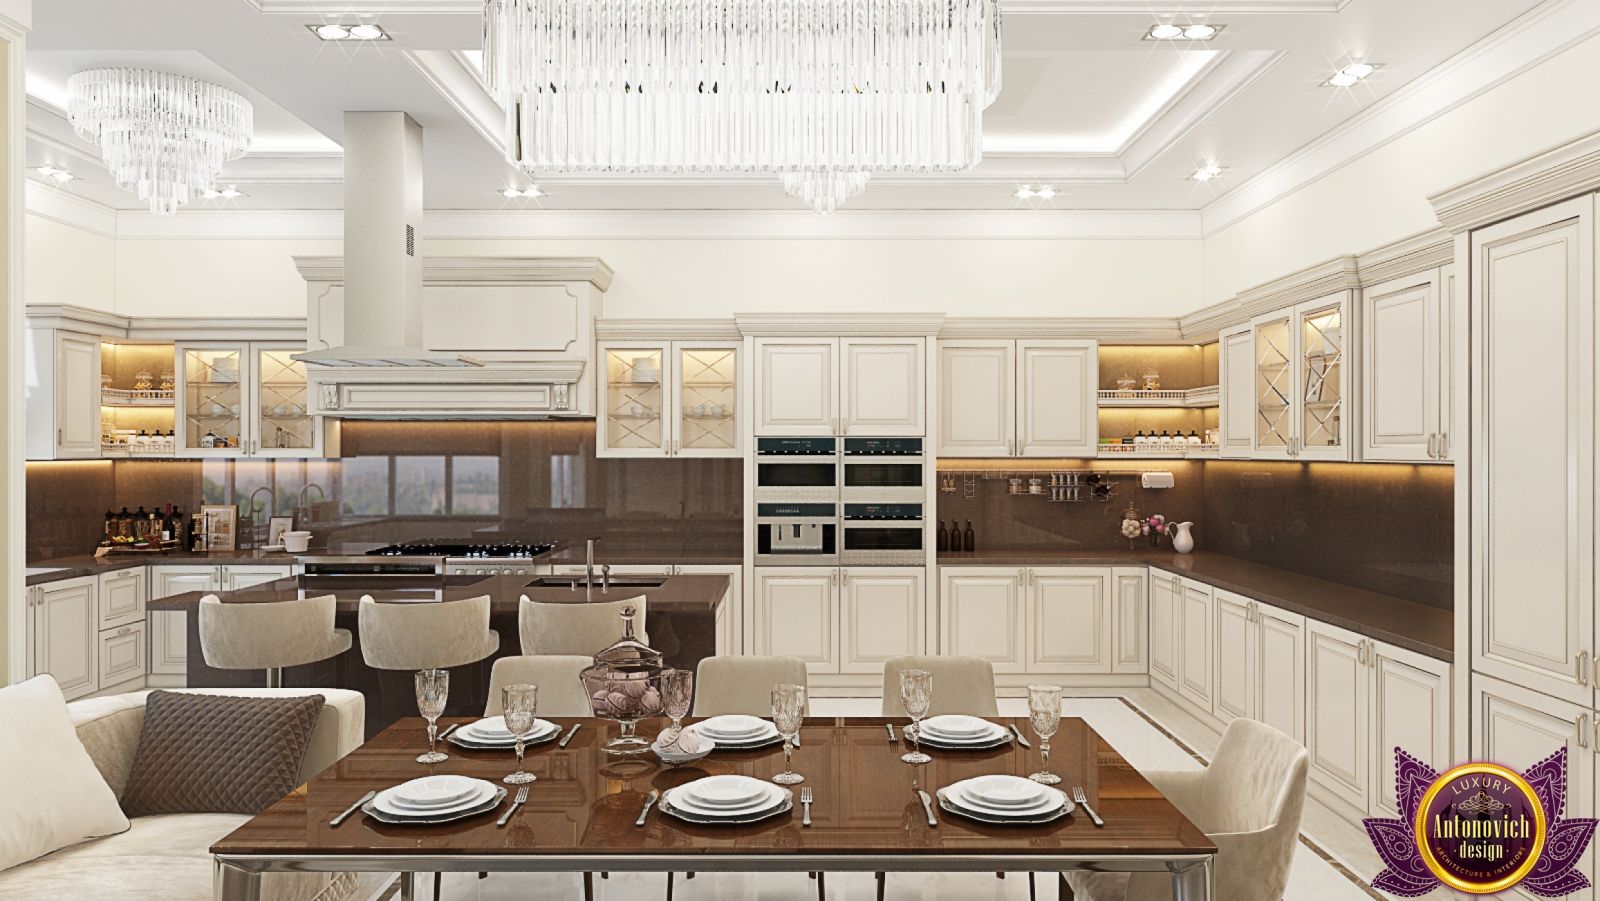 Modern kitchen with sleek white cabinets and island